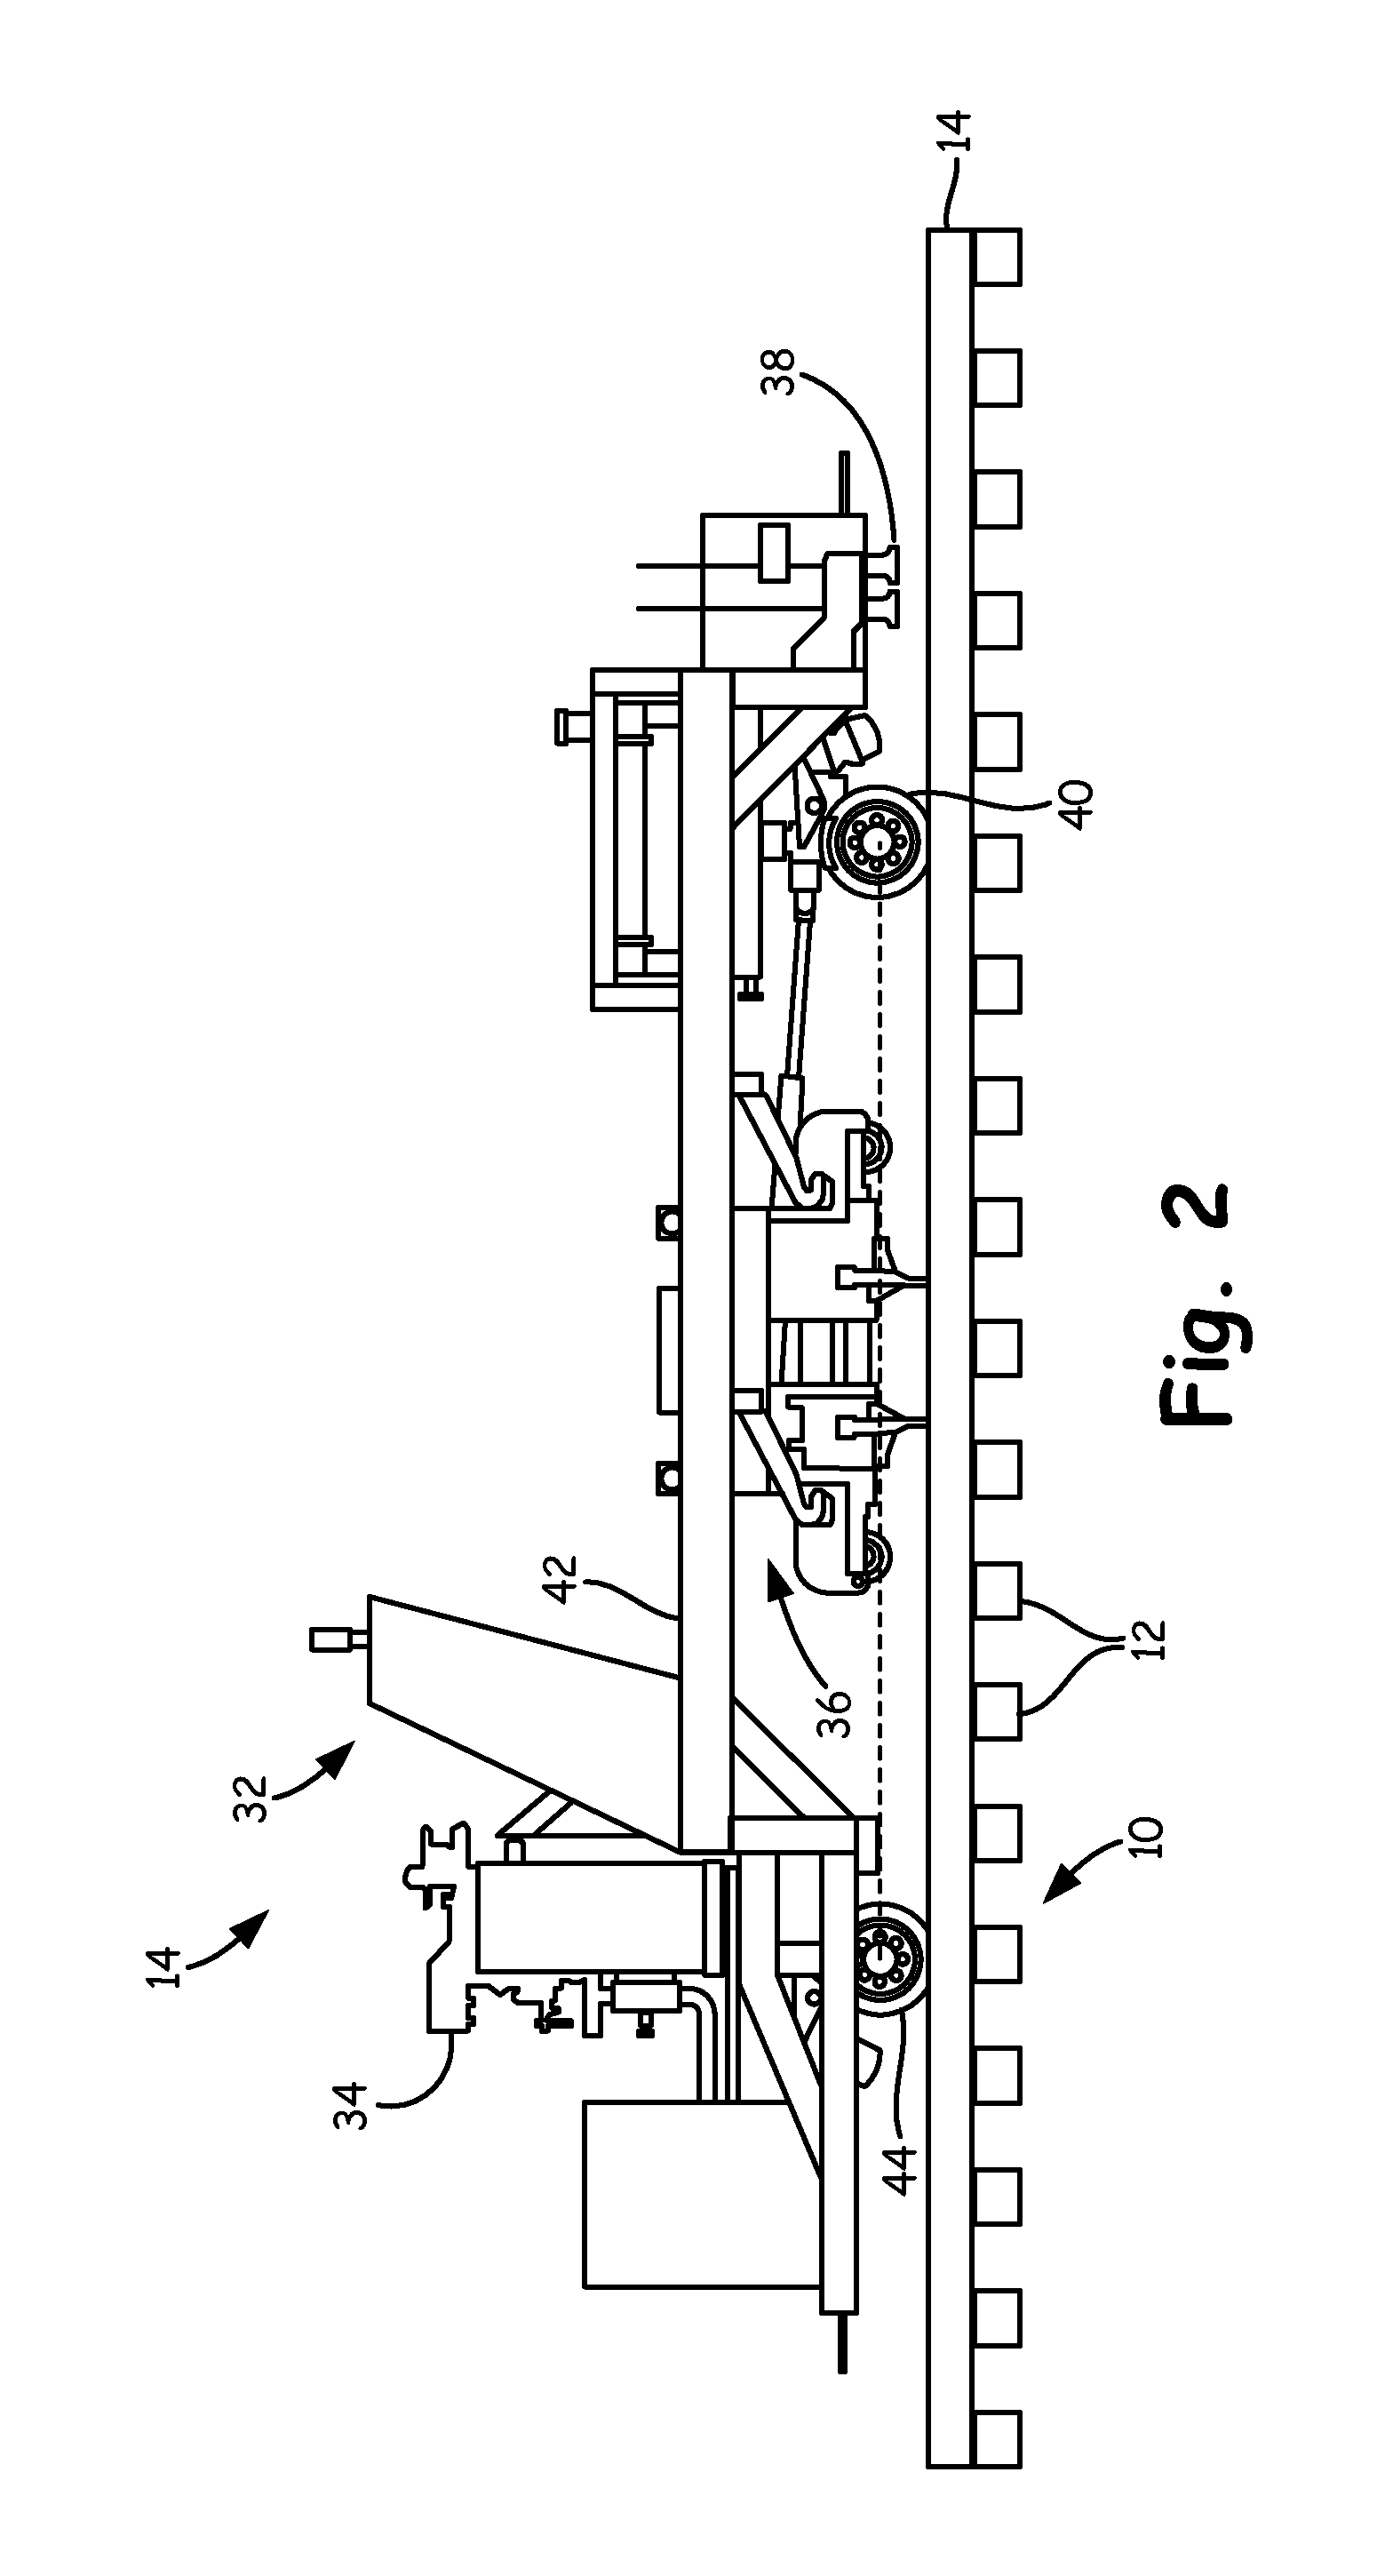 Lead rail vehicle with drone vehicle and method